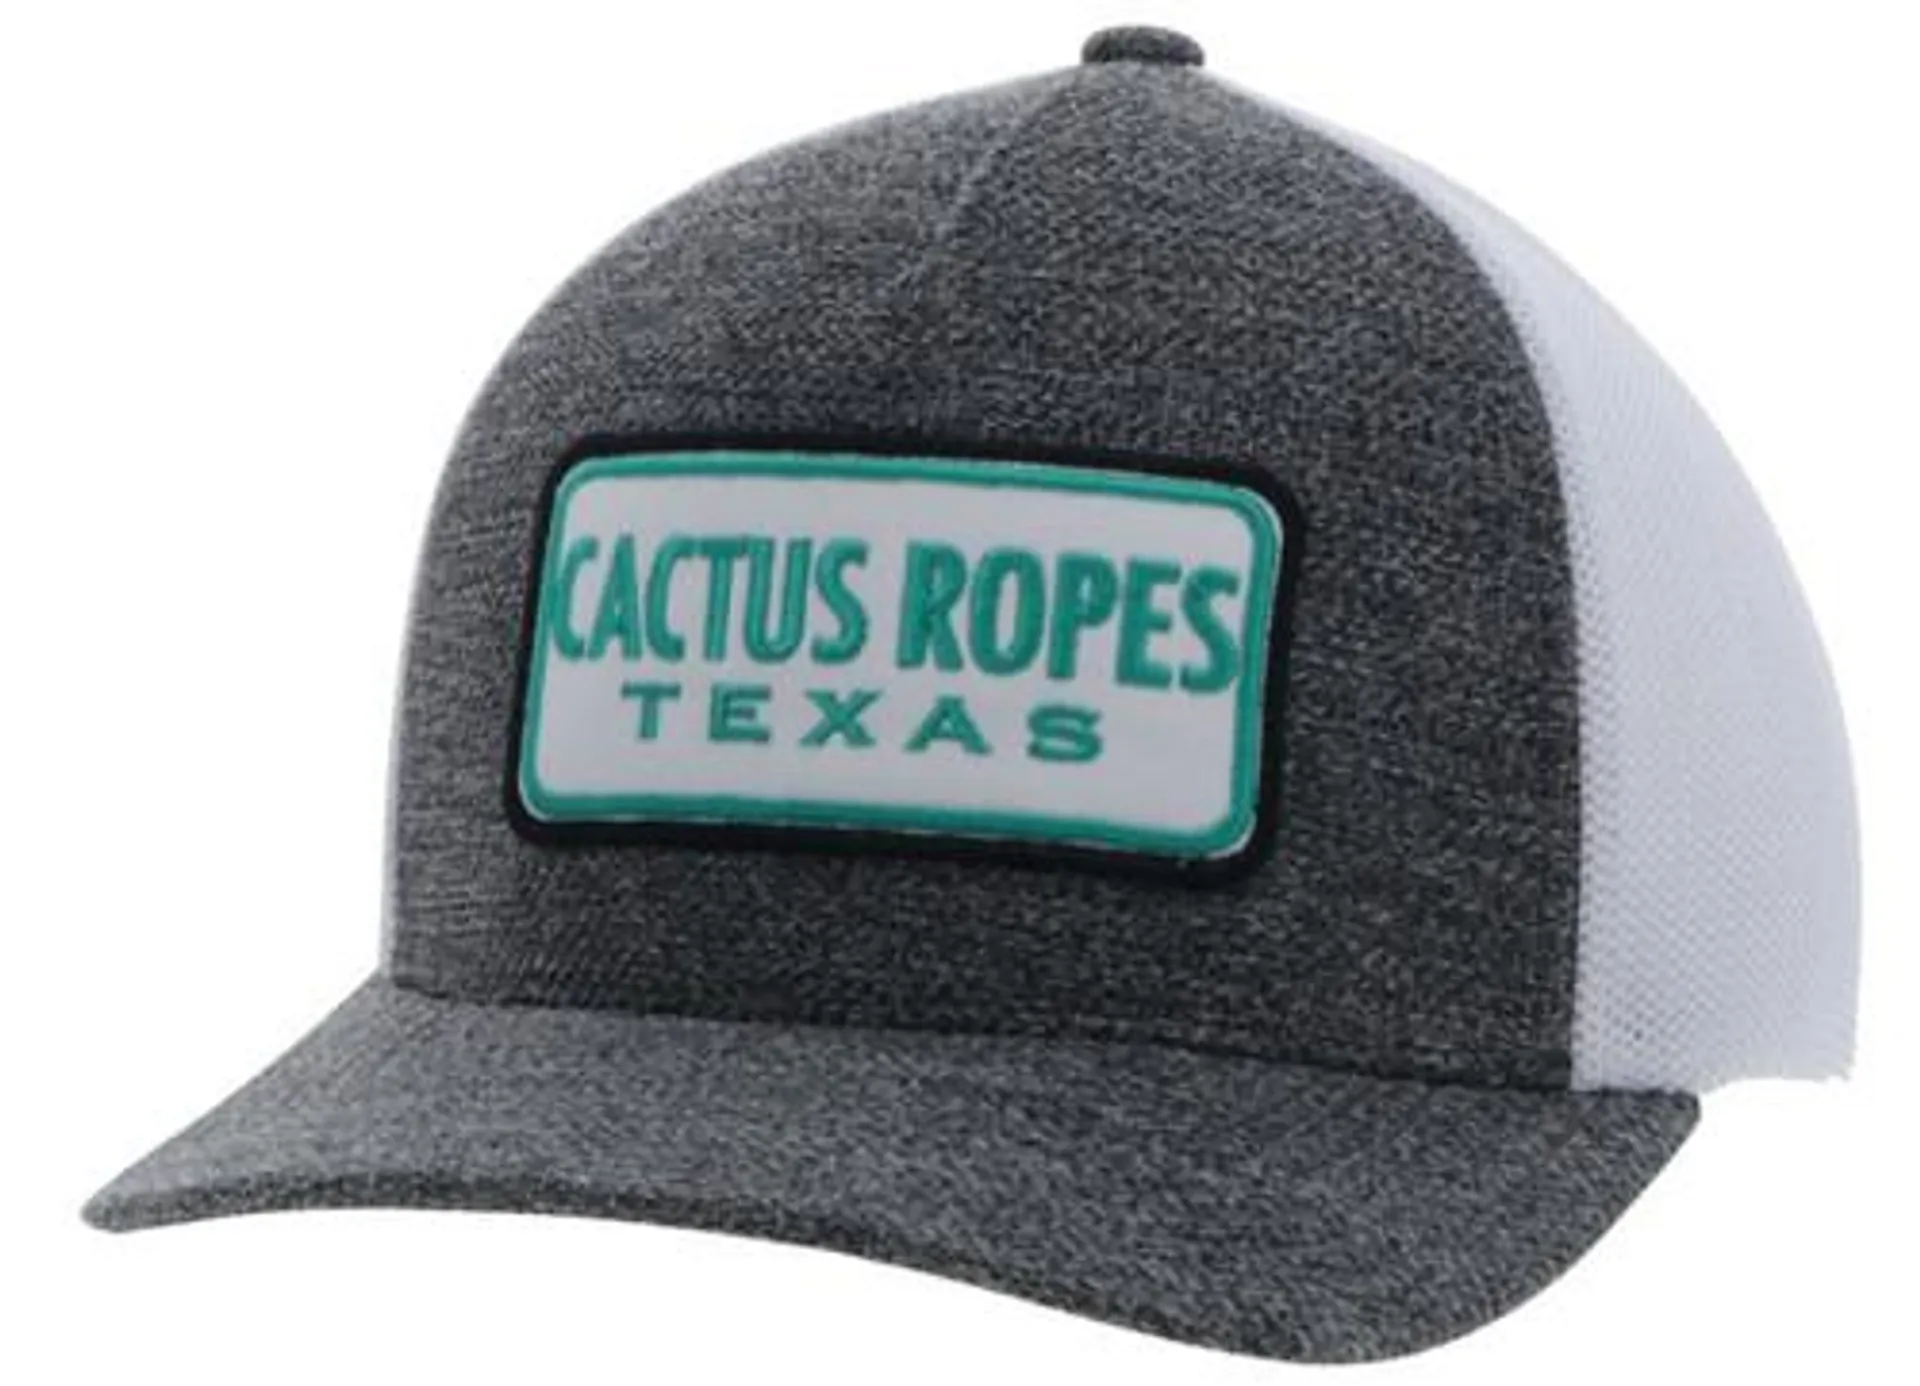 Hooey Men's Cactus Ropes Grey/White 5 Panel Trucker Flexfit Cap with Turquoise/White/Black Rectangle Patch